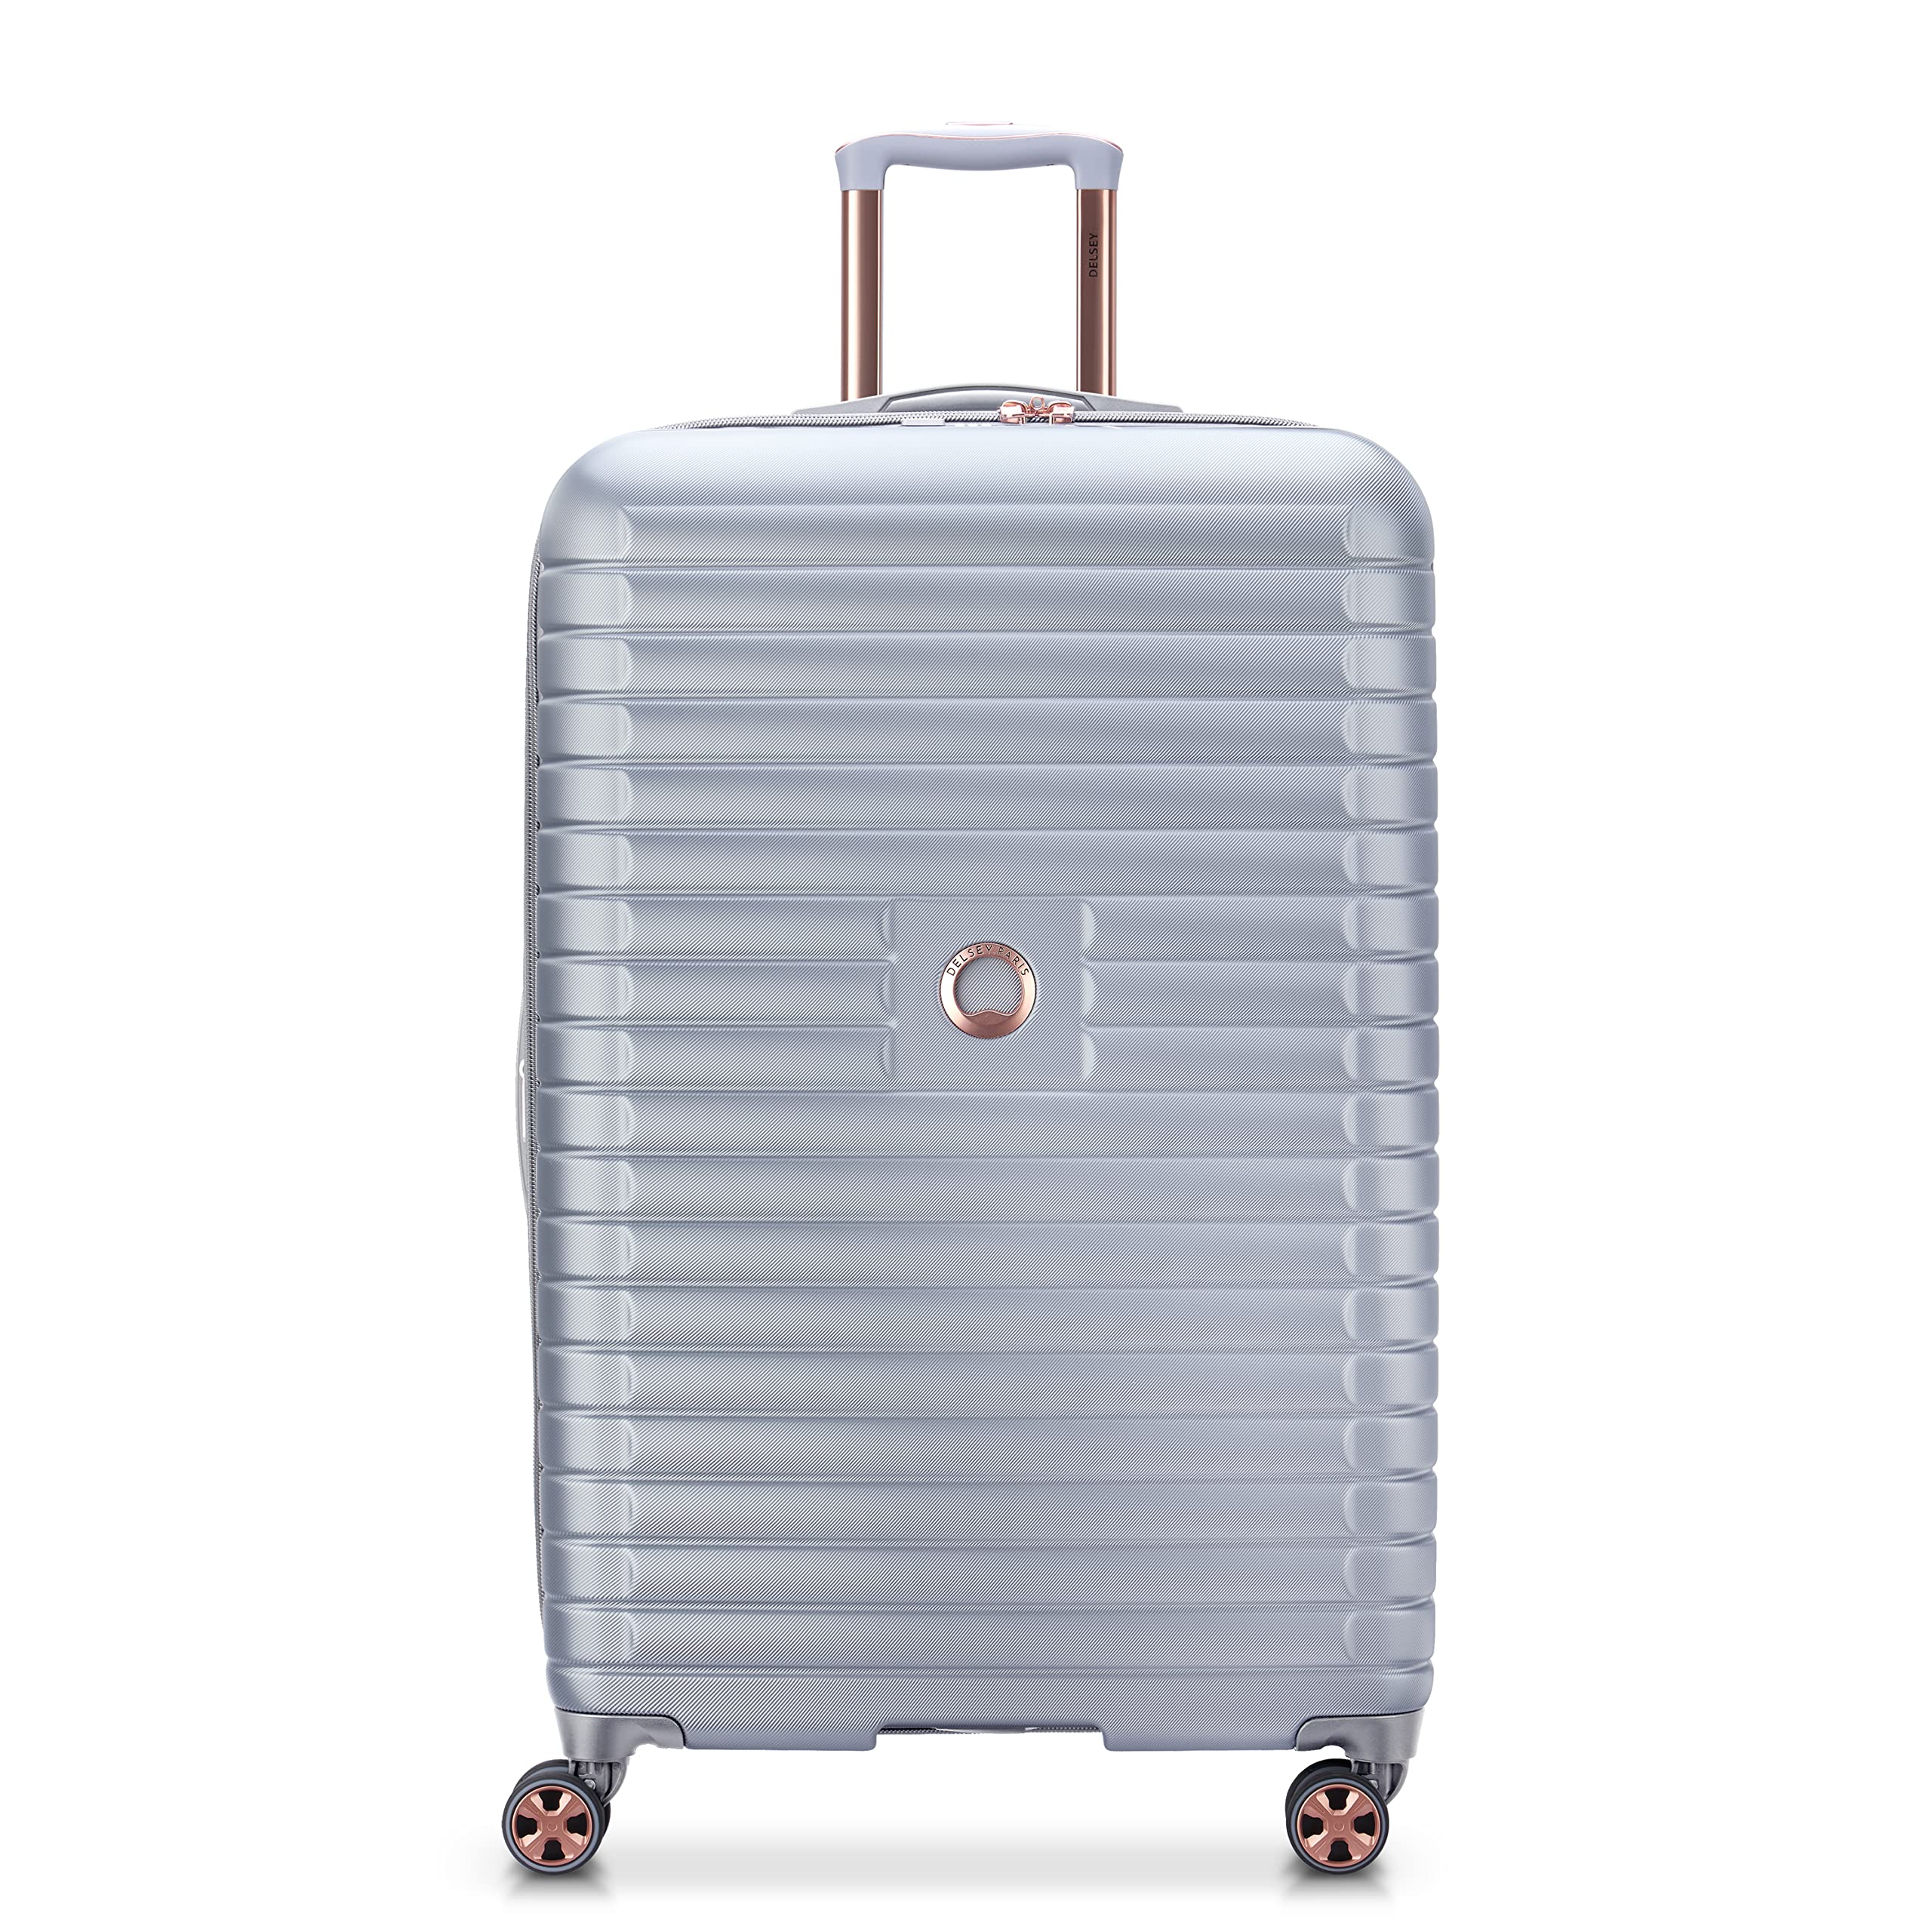 DELSEY Paris Cruise 3.0 Hardside Expandable Luggage with Spinner Wheels, Platinum, Checked-Large 28 Inch